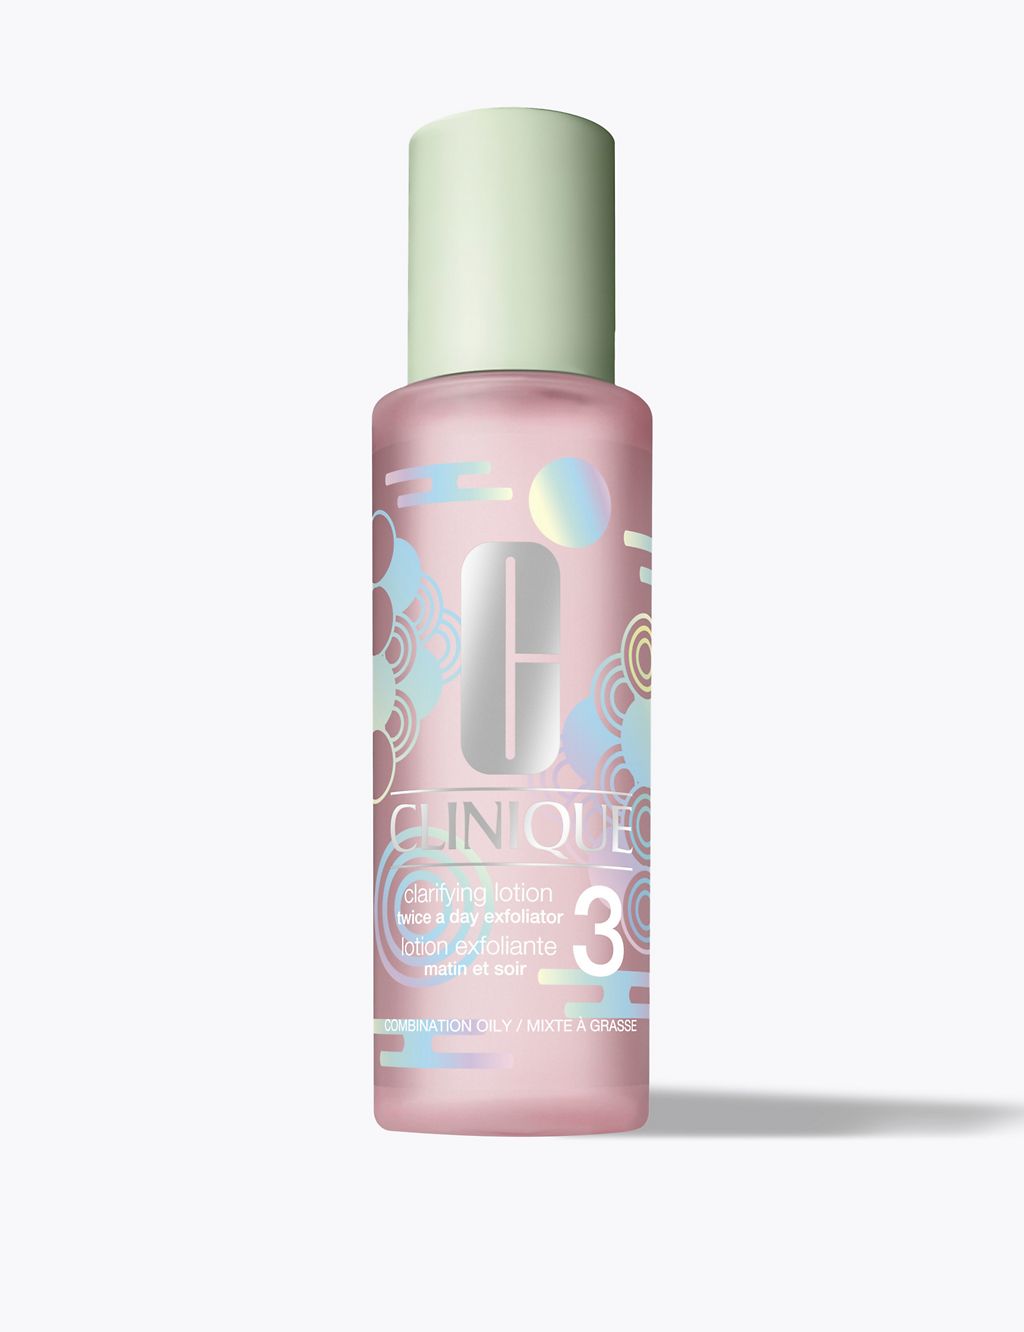 Limited Edition Clarifying Lotion 2 200ml 1 of 1